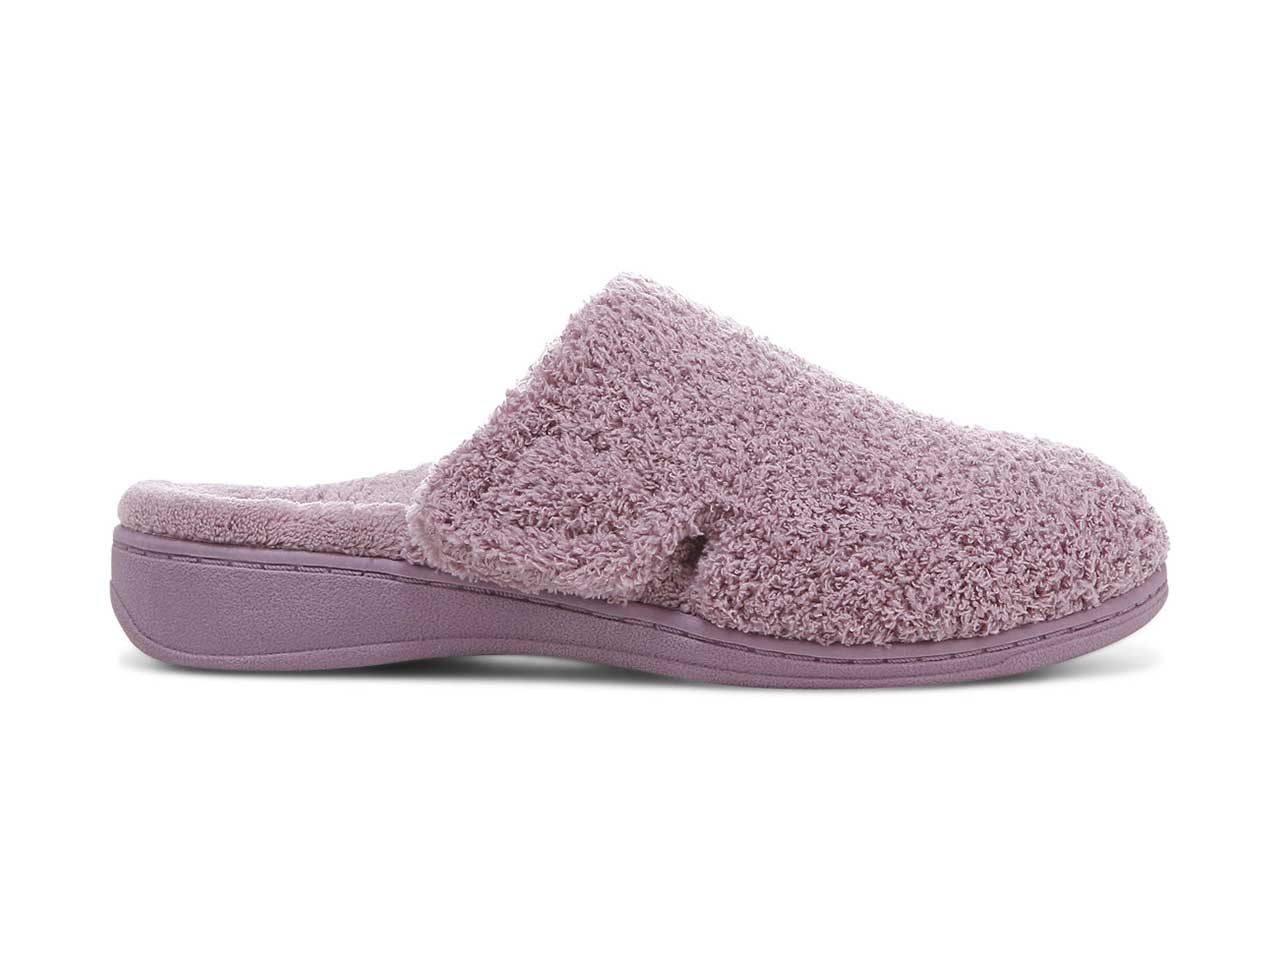 A fuzzy purple mule with a platform sole from Vionic.